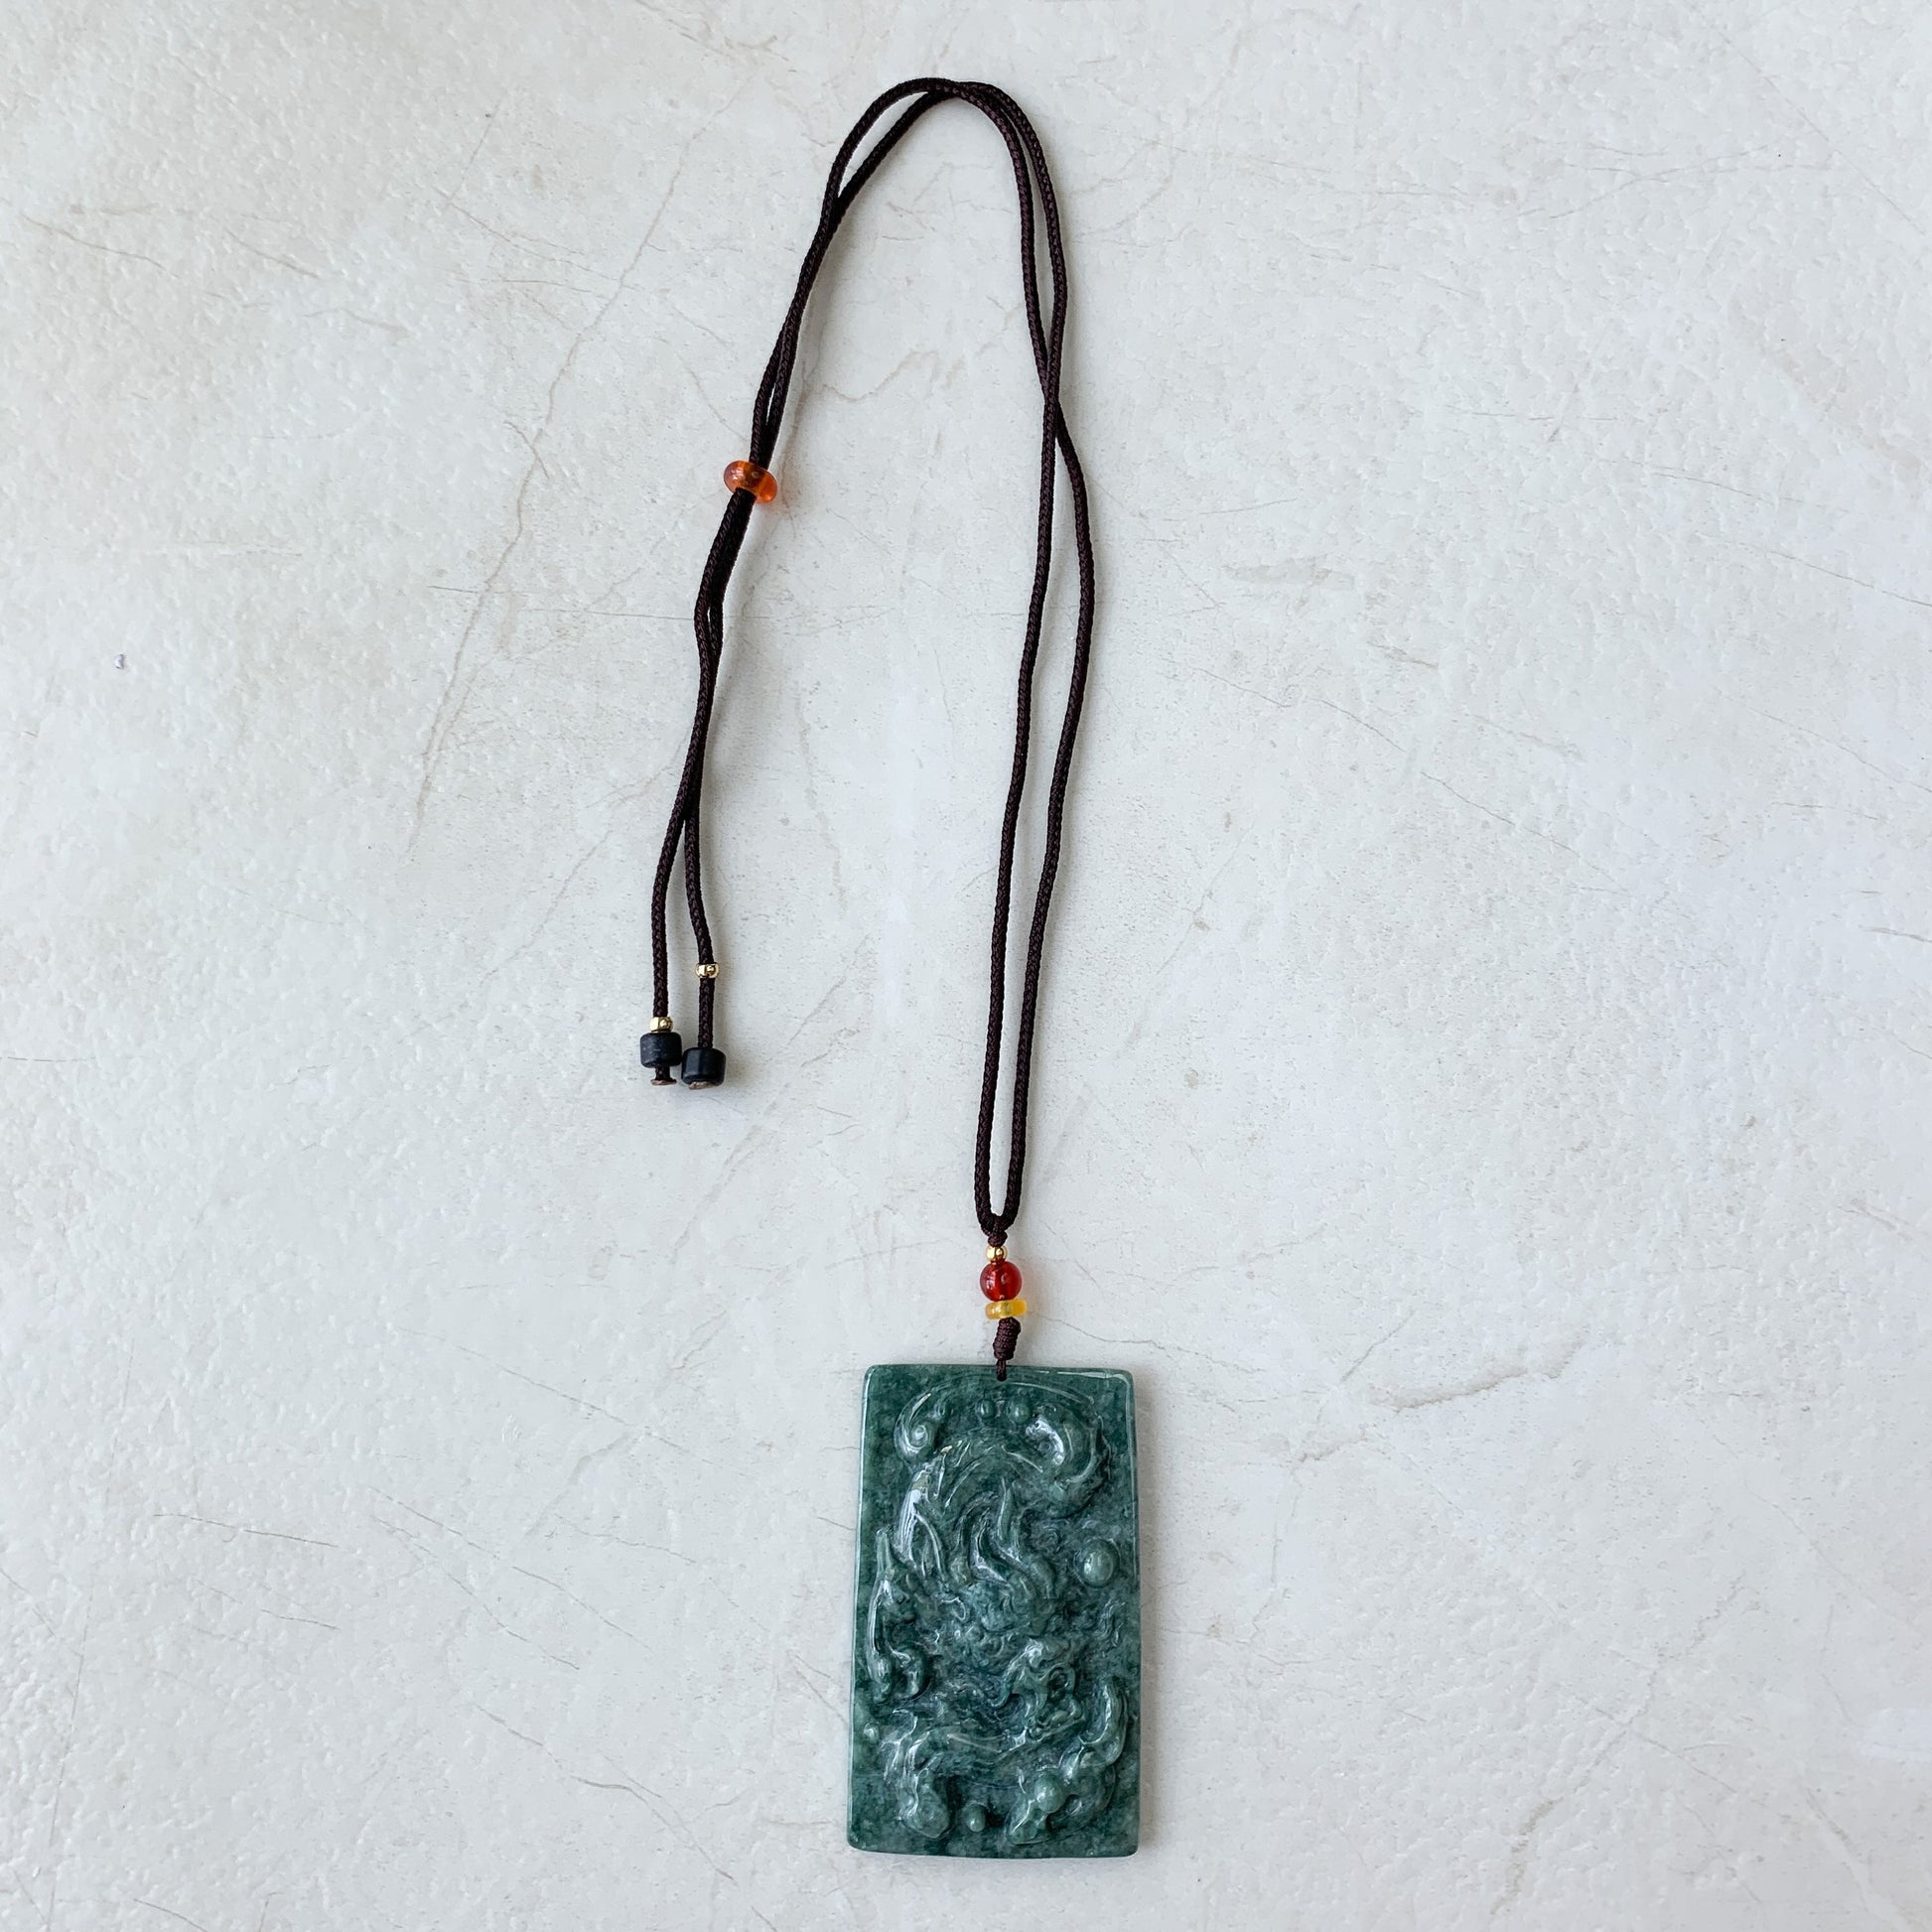 Jadeite Jade Dragon Chinese Zodiac Hand Carved Pendant Necklace, YJ-0321-0352327 - AriaDesignCollection